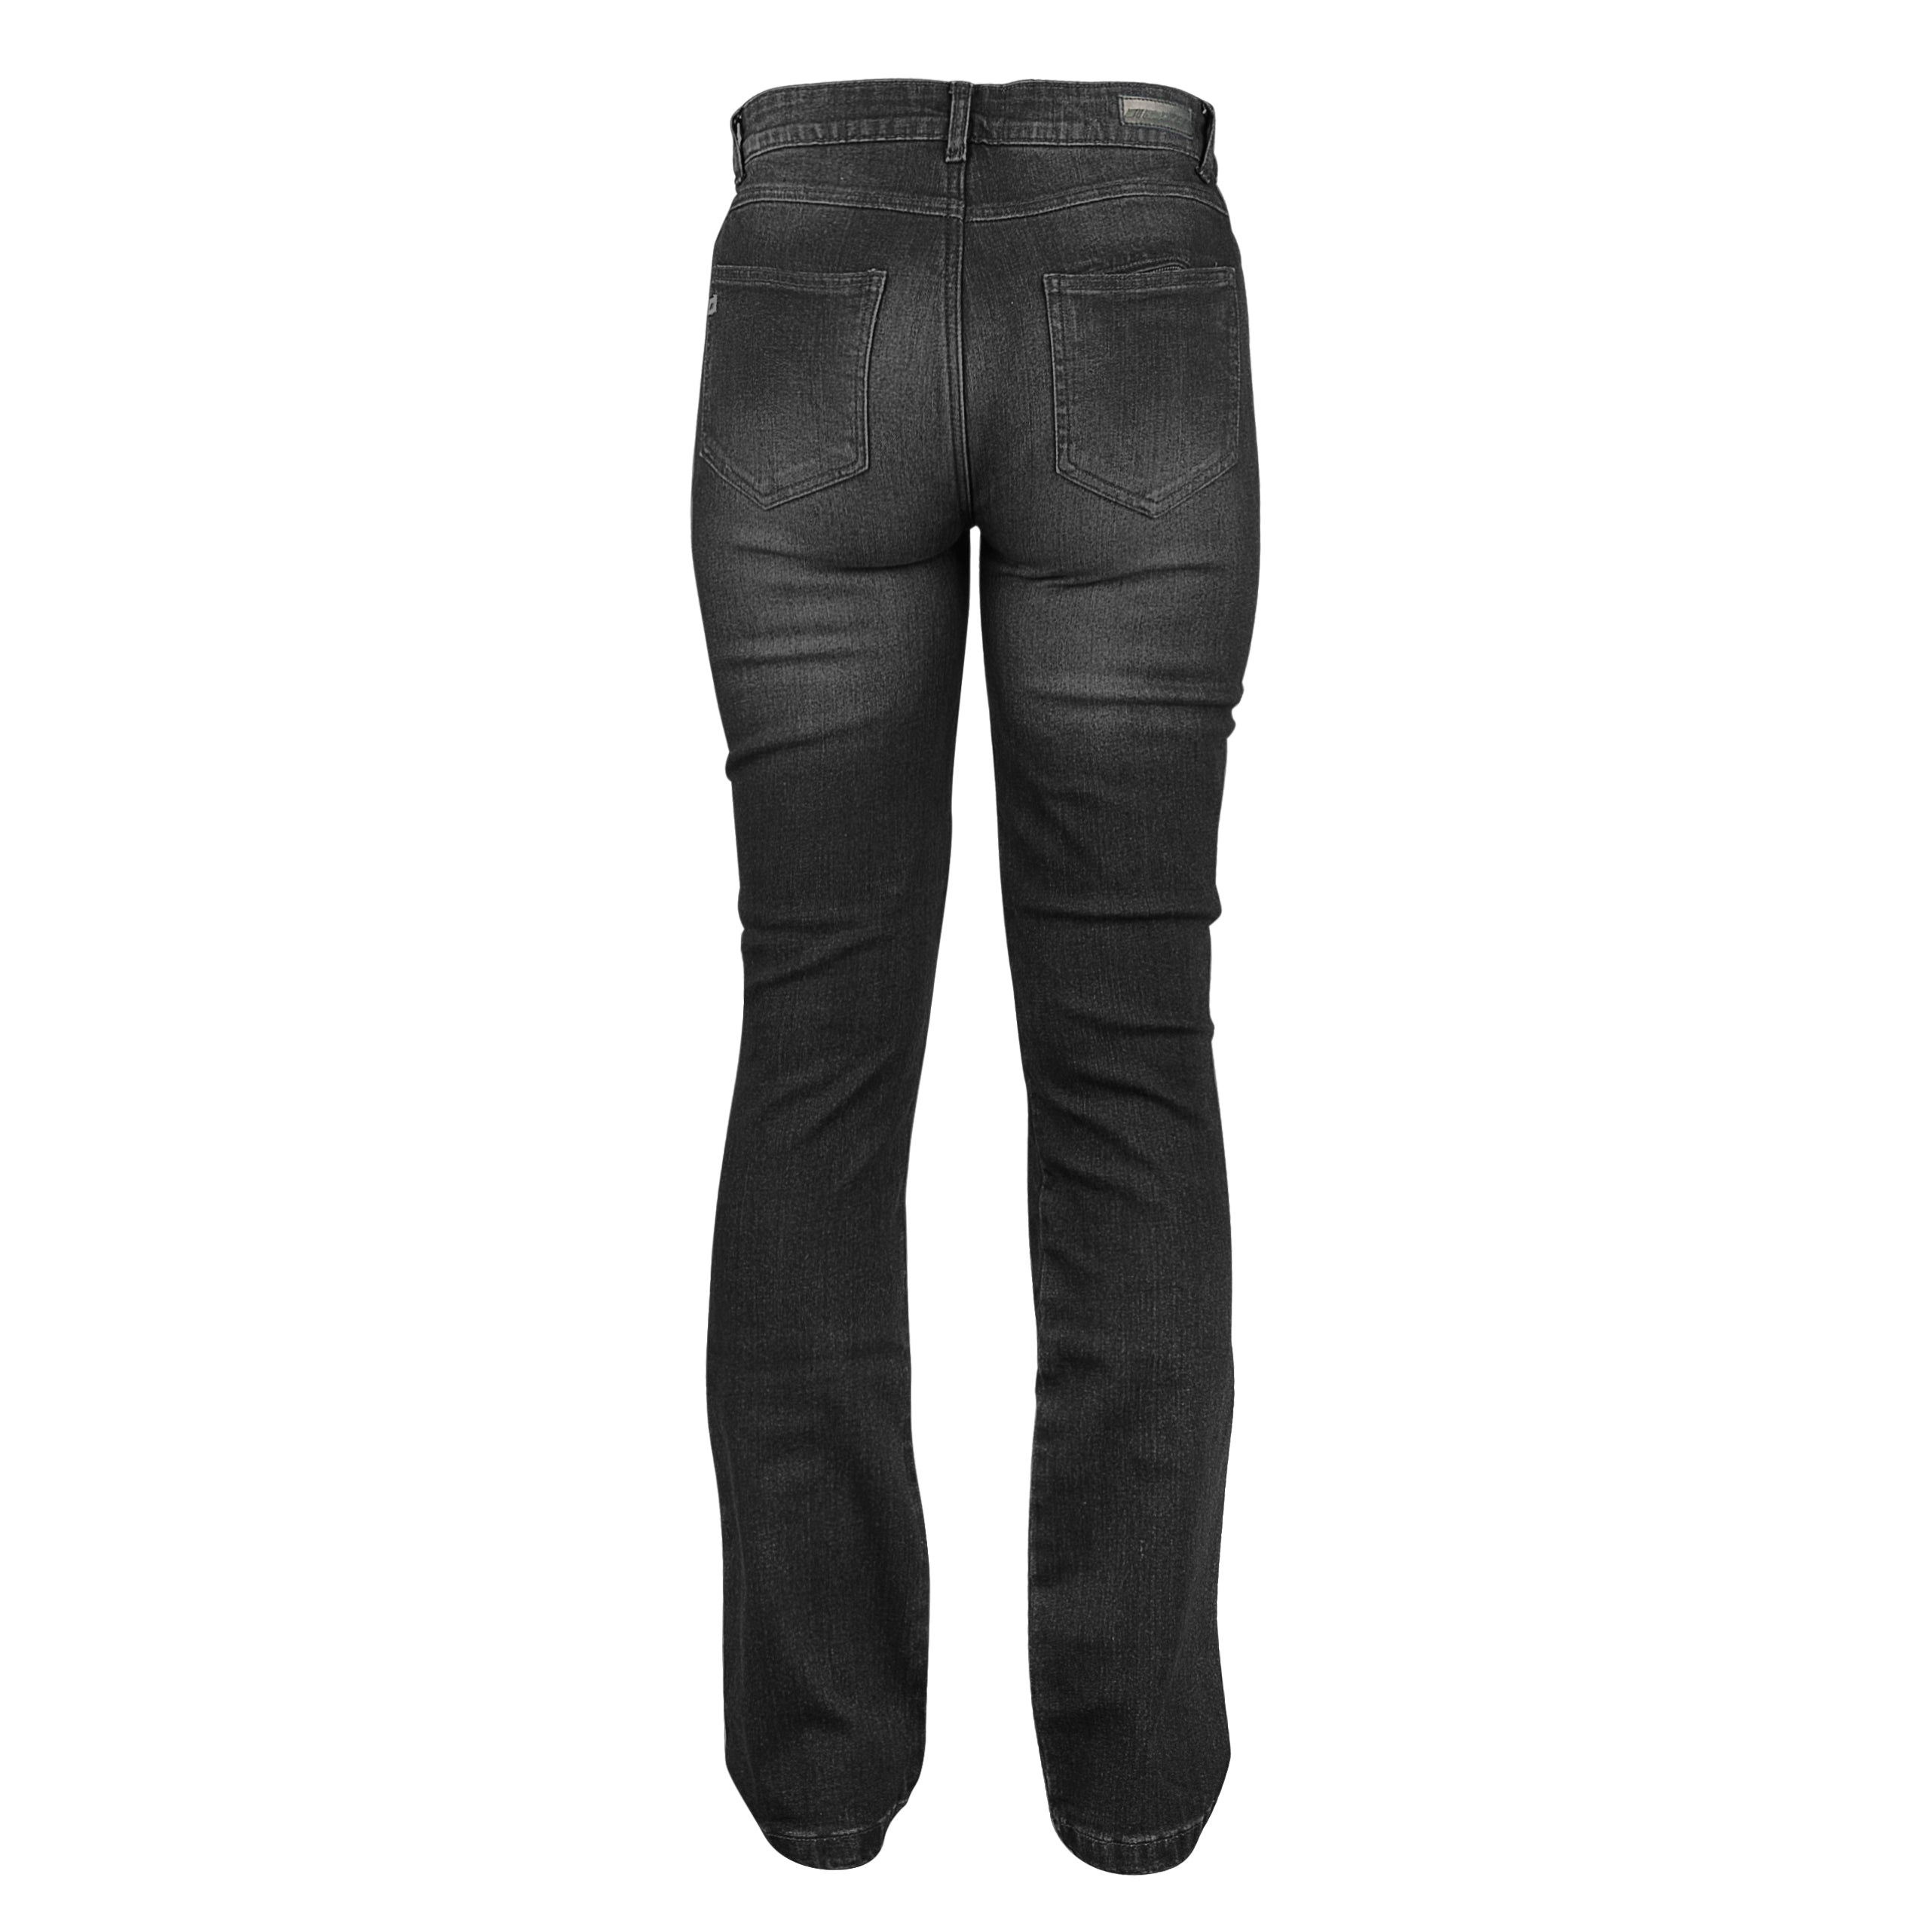 Joe Rocket Canada Women's Aurora Reinforced and Armoured Motorcycle Jeans